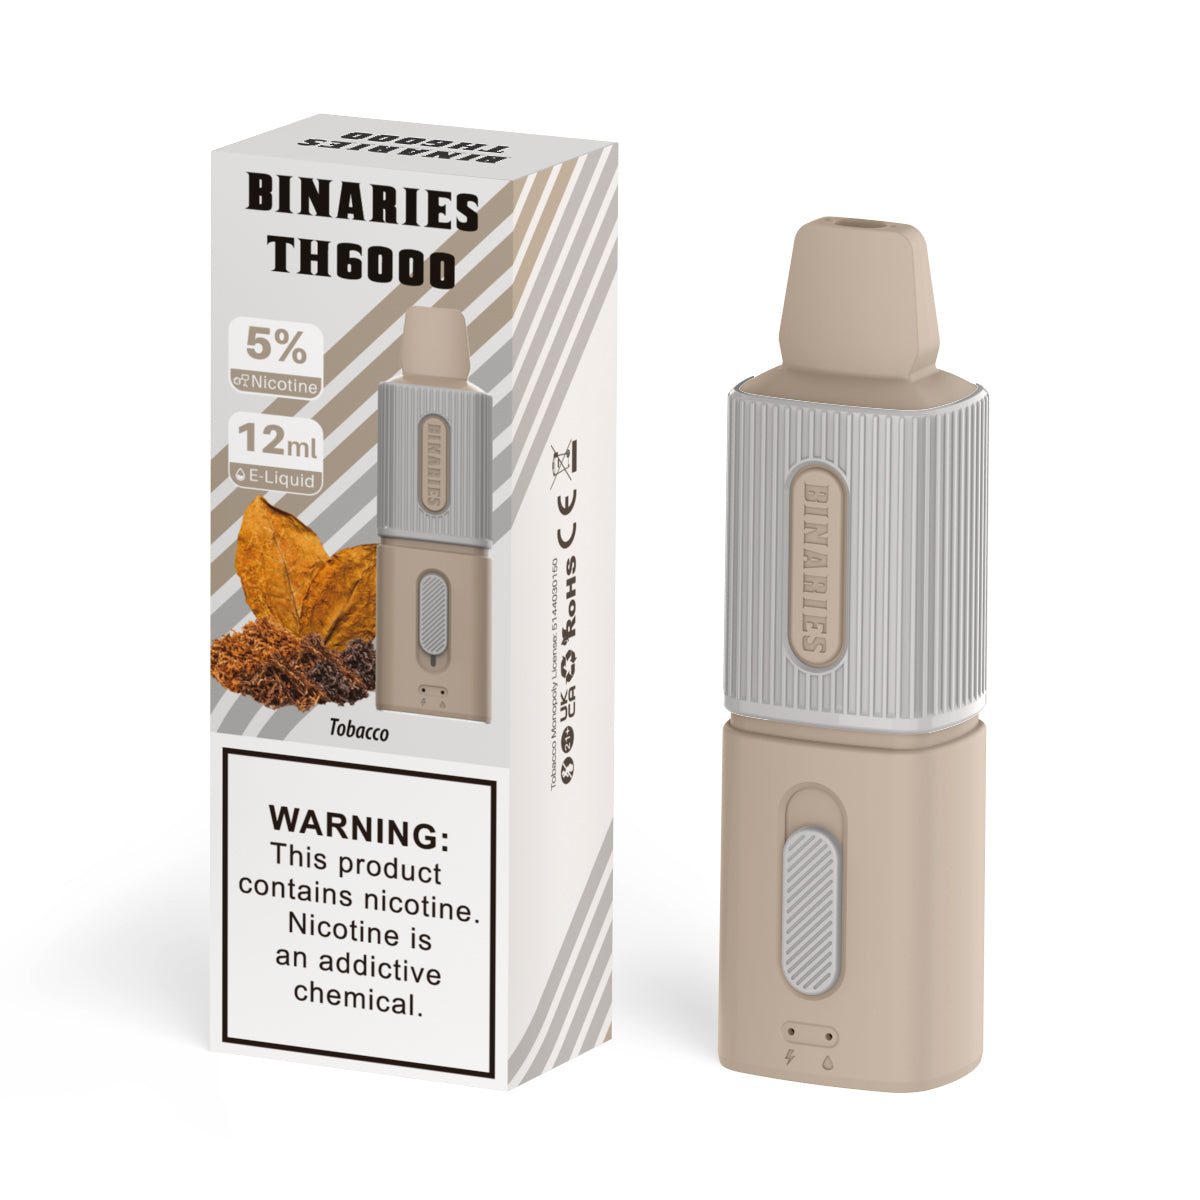 Binaries Cabin Disposable TH | 6000 Puffs | 12mL | 50mg Tobacco with Packaging